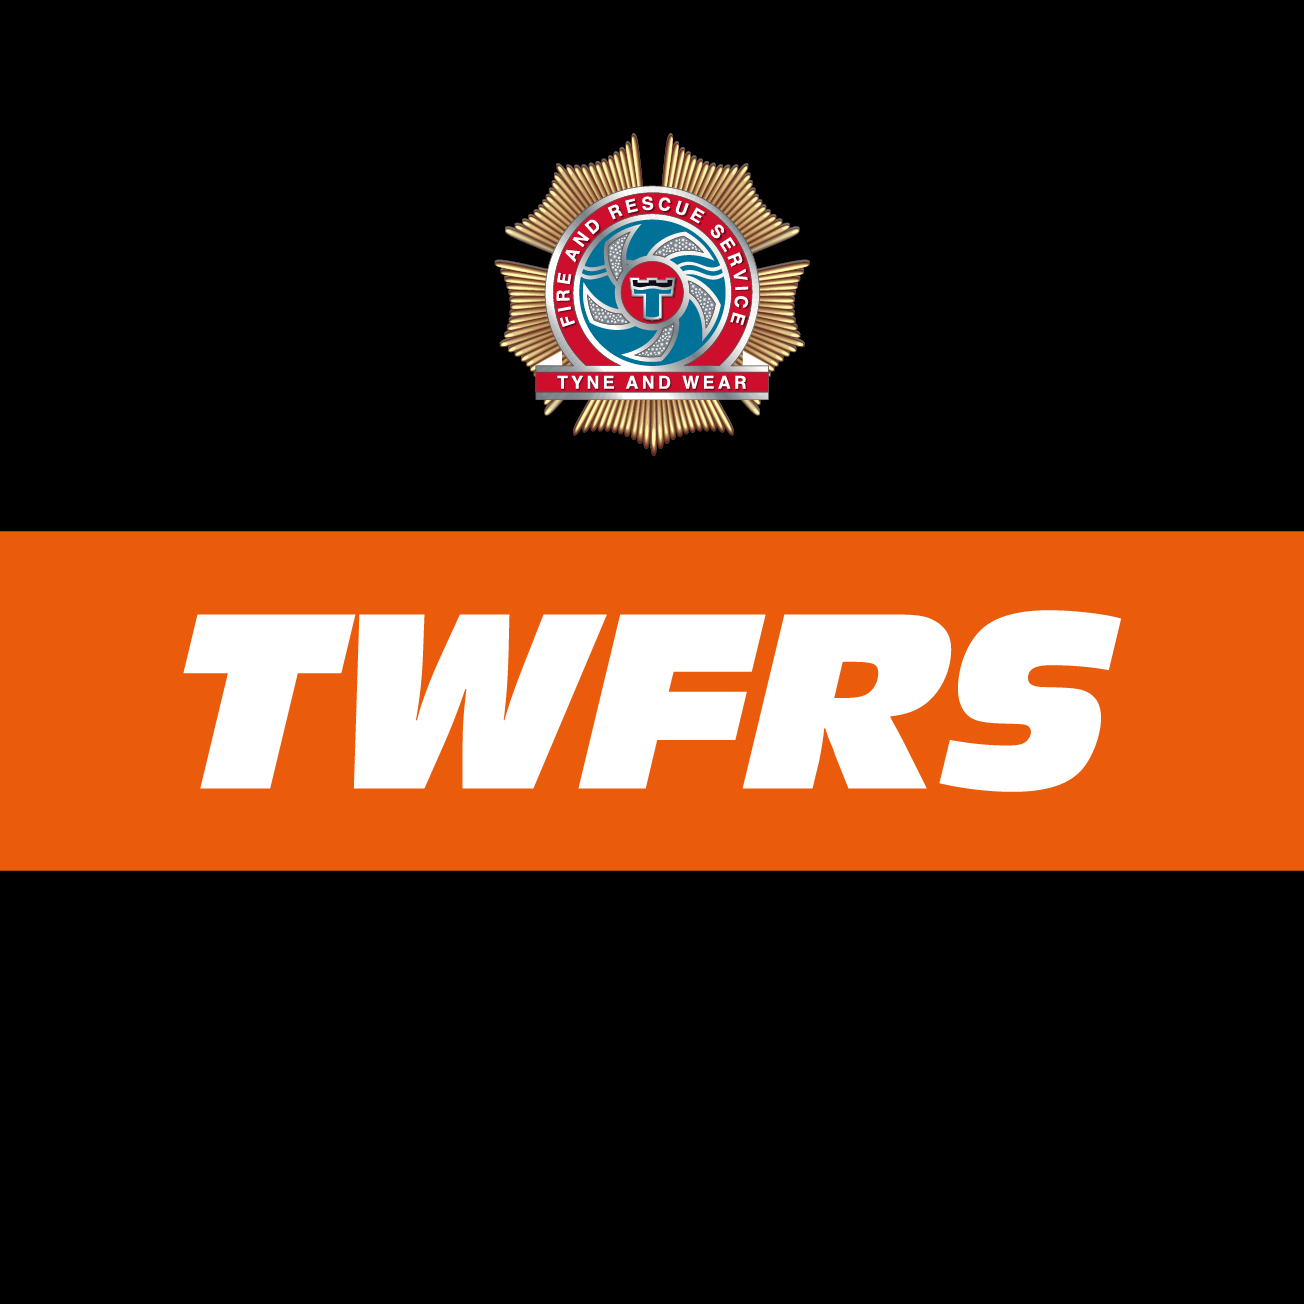 Club Image for TWFRS